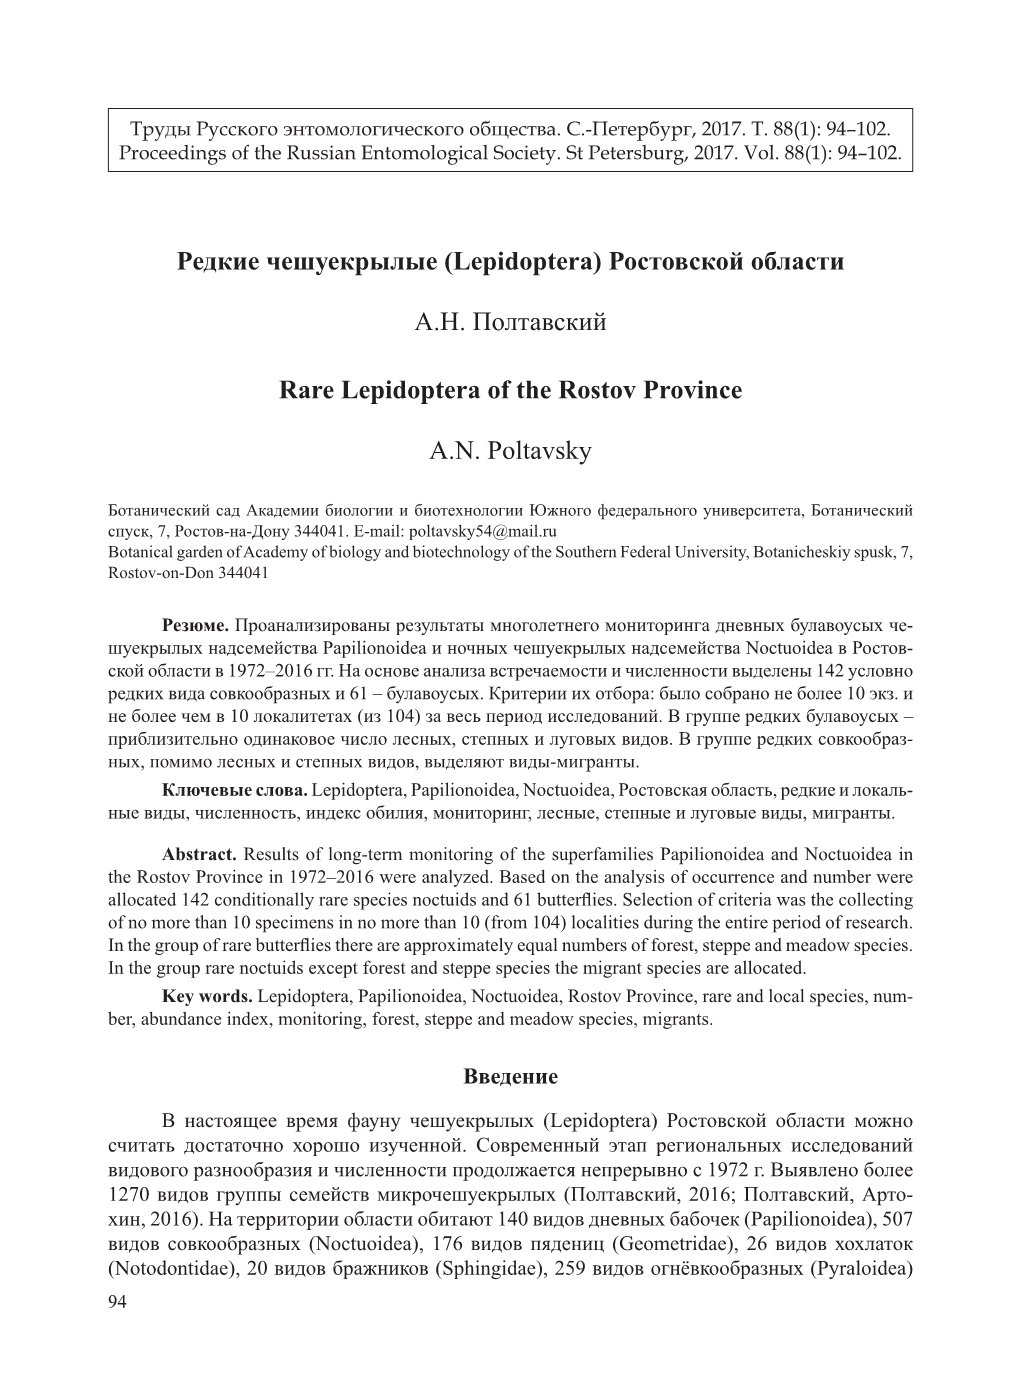 Proceedings of the Russian Entomological Society. Vol. 88(1